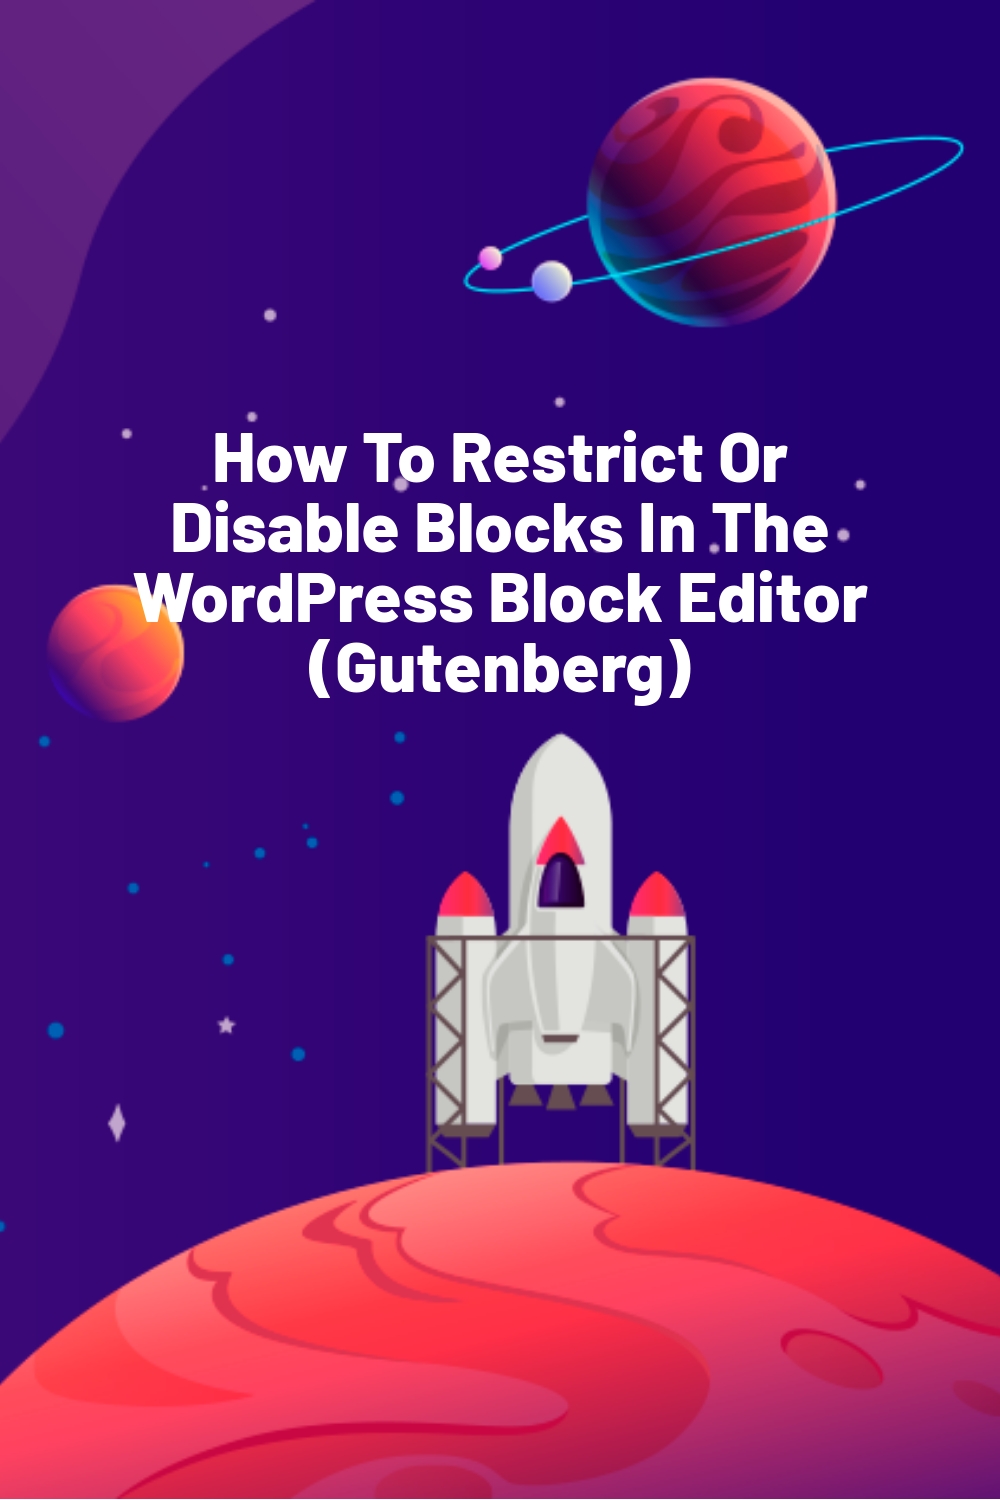 How To Restrict Or Disable Blocks In The WordPress Block Editor (Gutenberg)